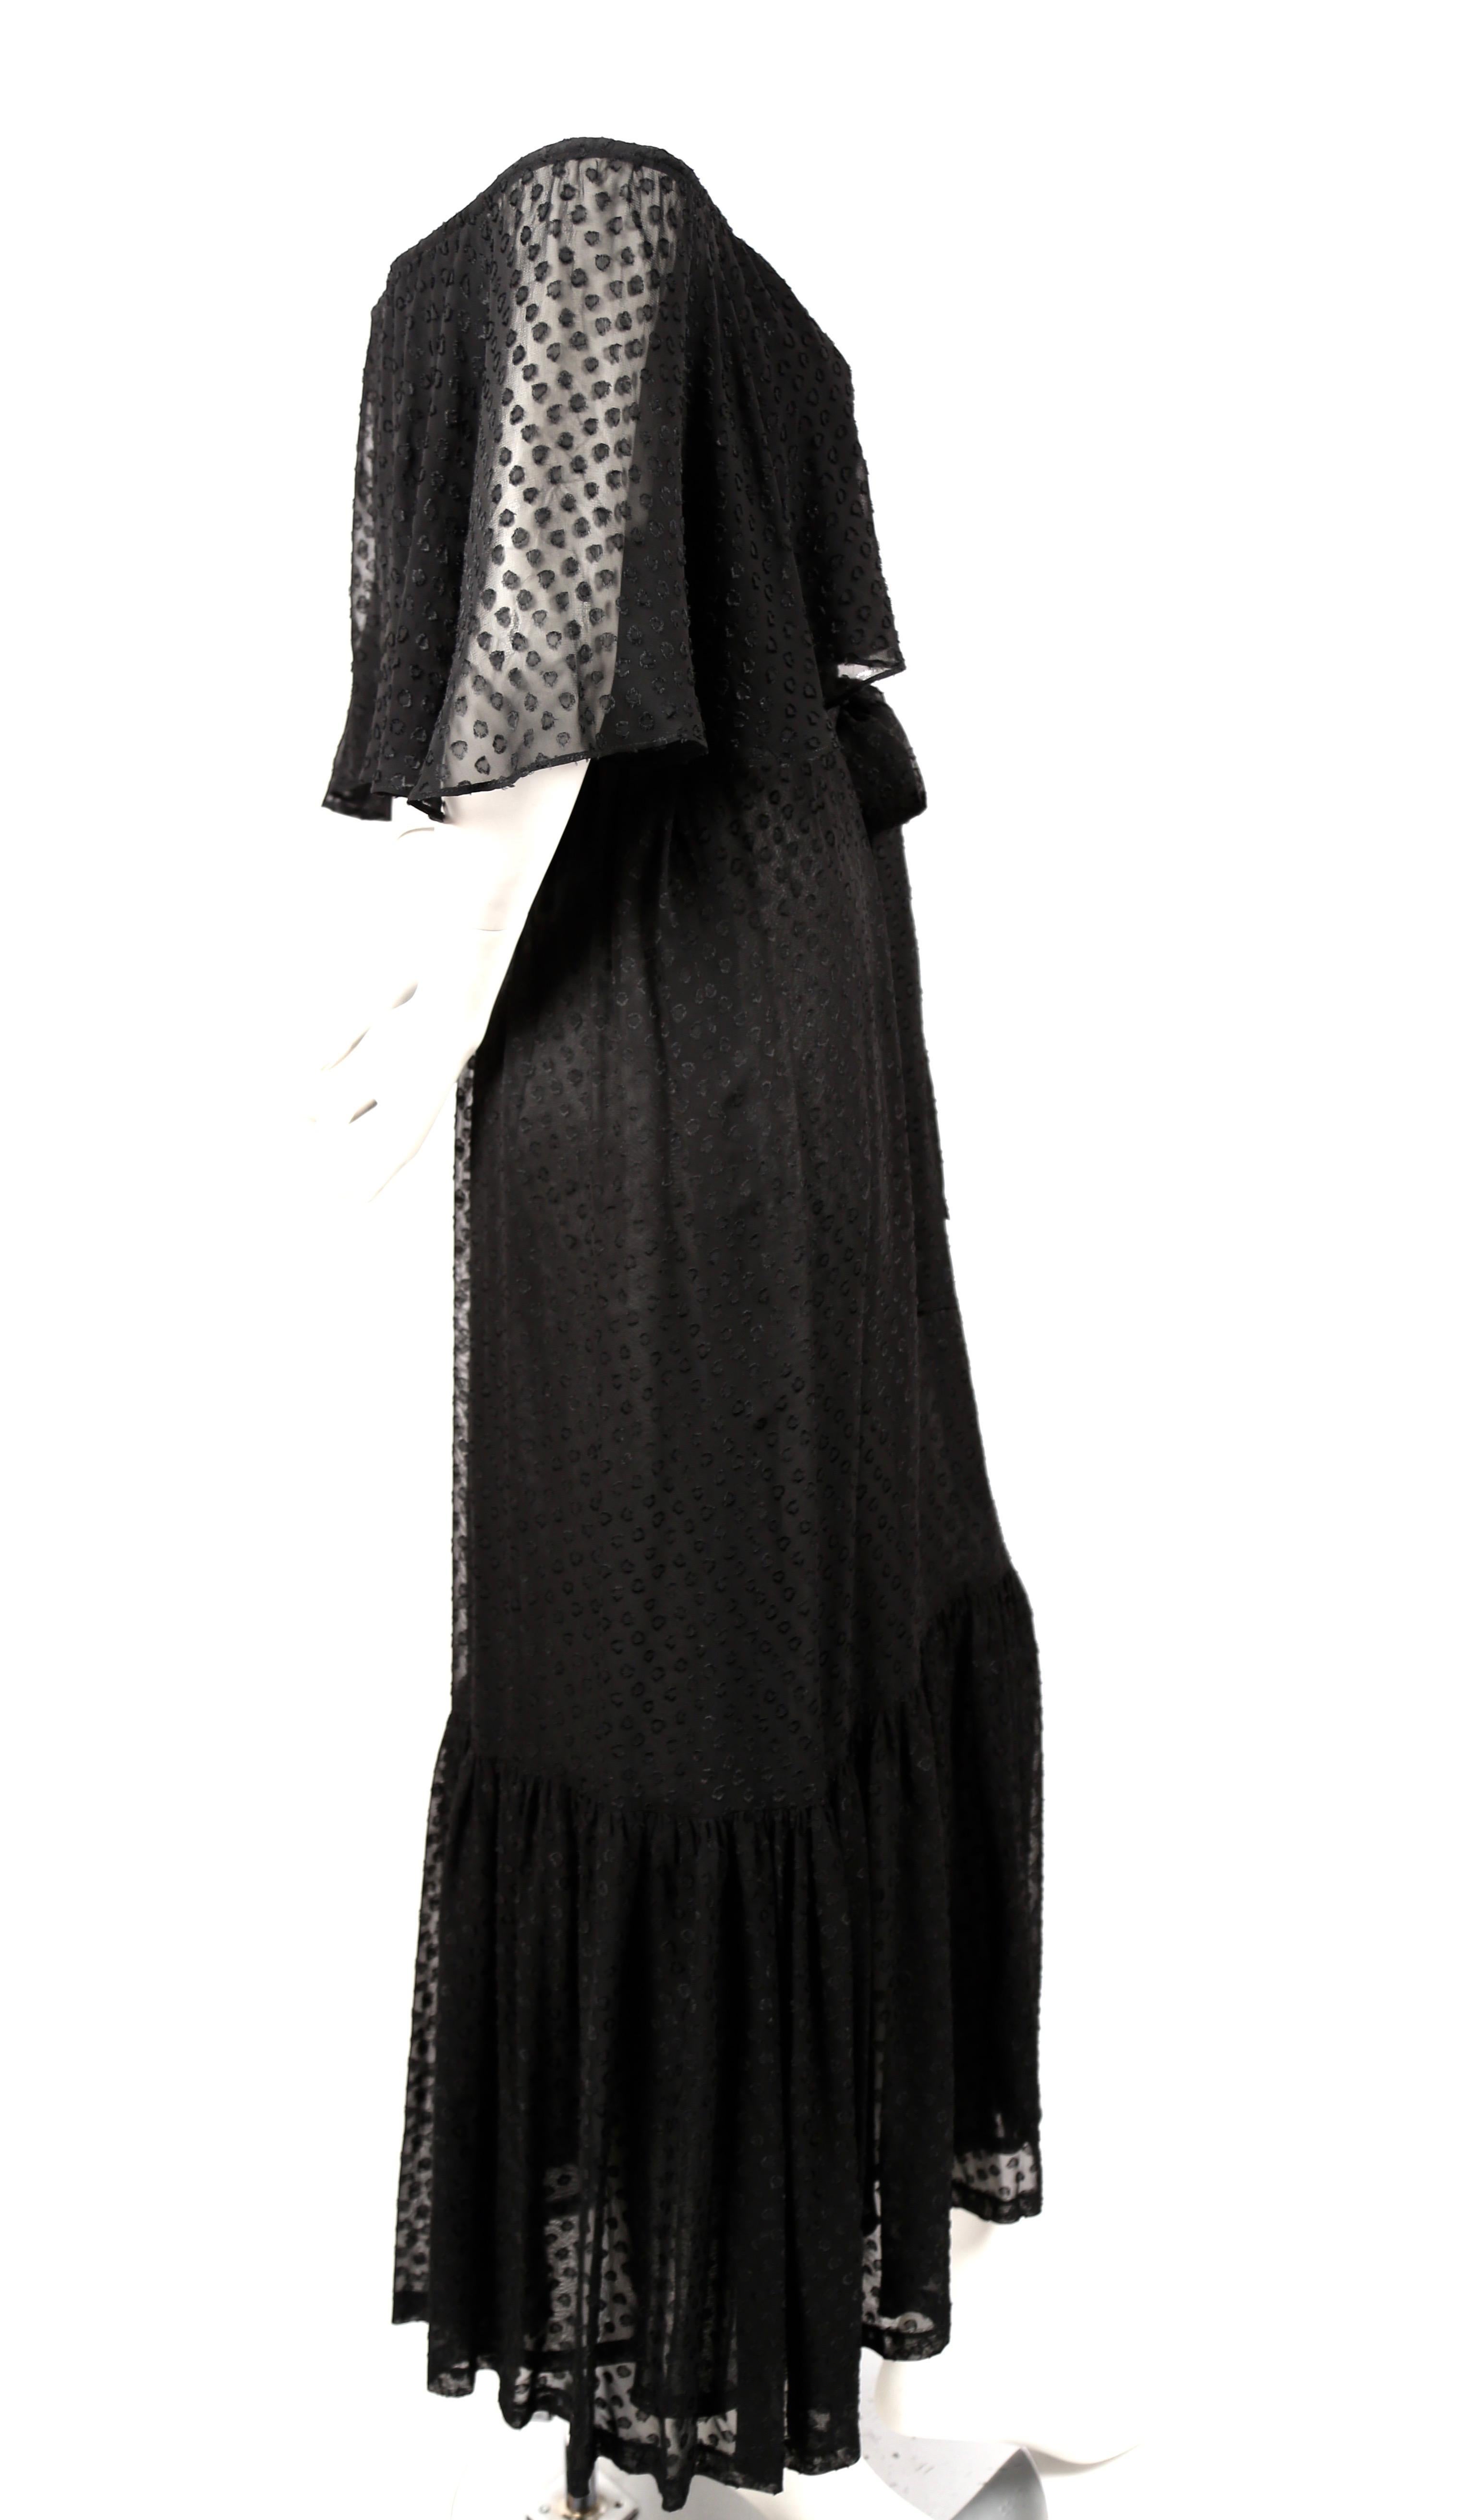 Black off-the-shoulder peasant dress with woven abstract pattern and matching belt from Yves Saint Laurent dating to the 1970's. Dress is labeled a French size 38, however it best fits a modern French 36 or 38 or US 2-6. Approximate measurements: